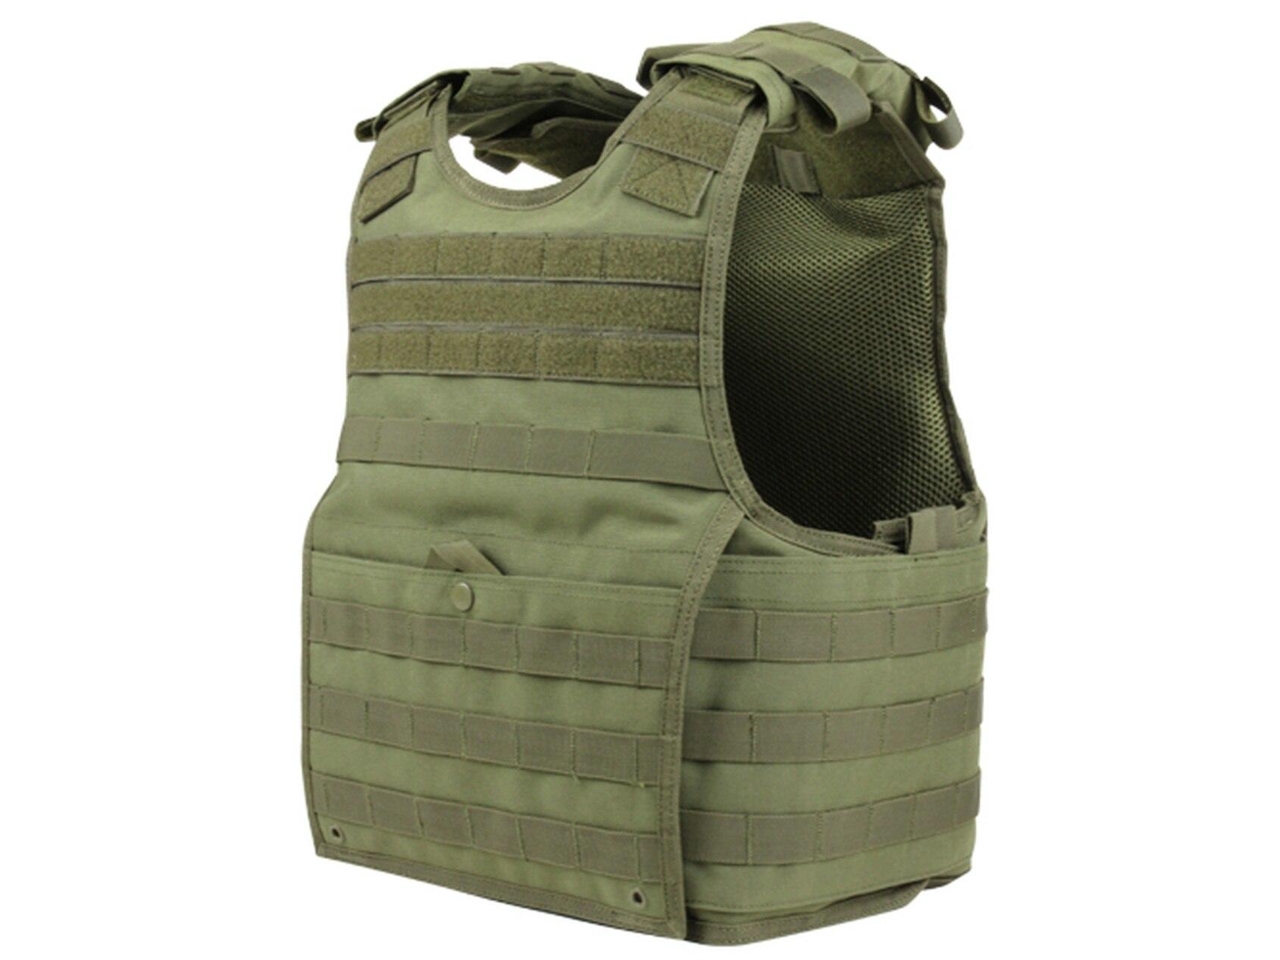 Condor MOLLE Exo Plate Carrier - S/M, Olive Drab, Small